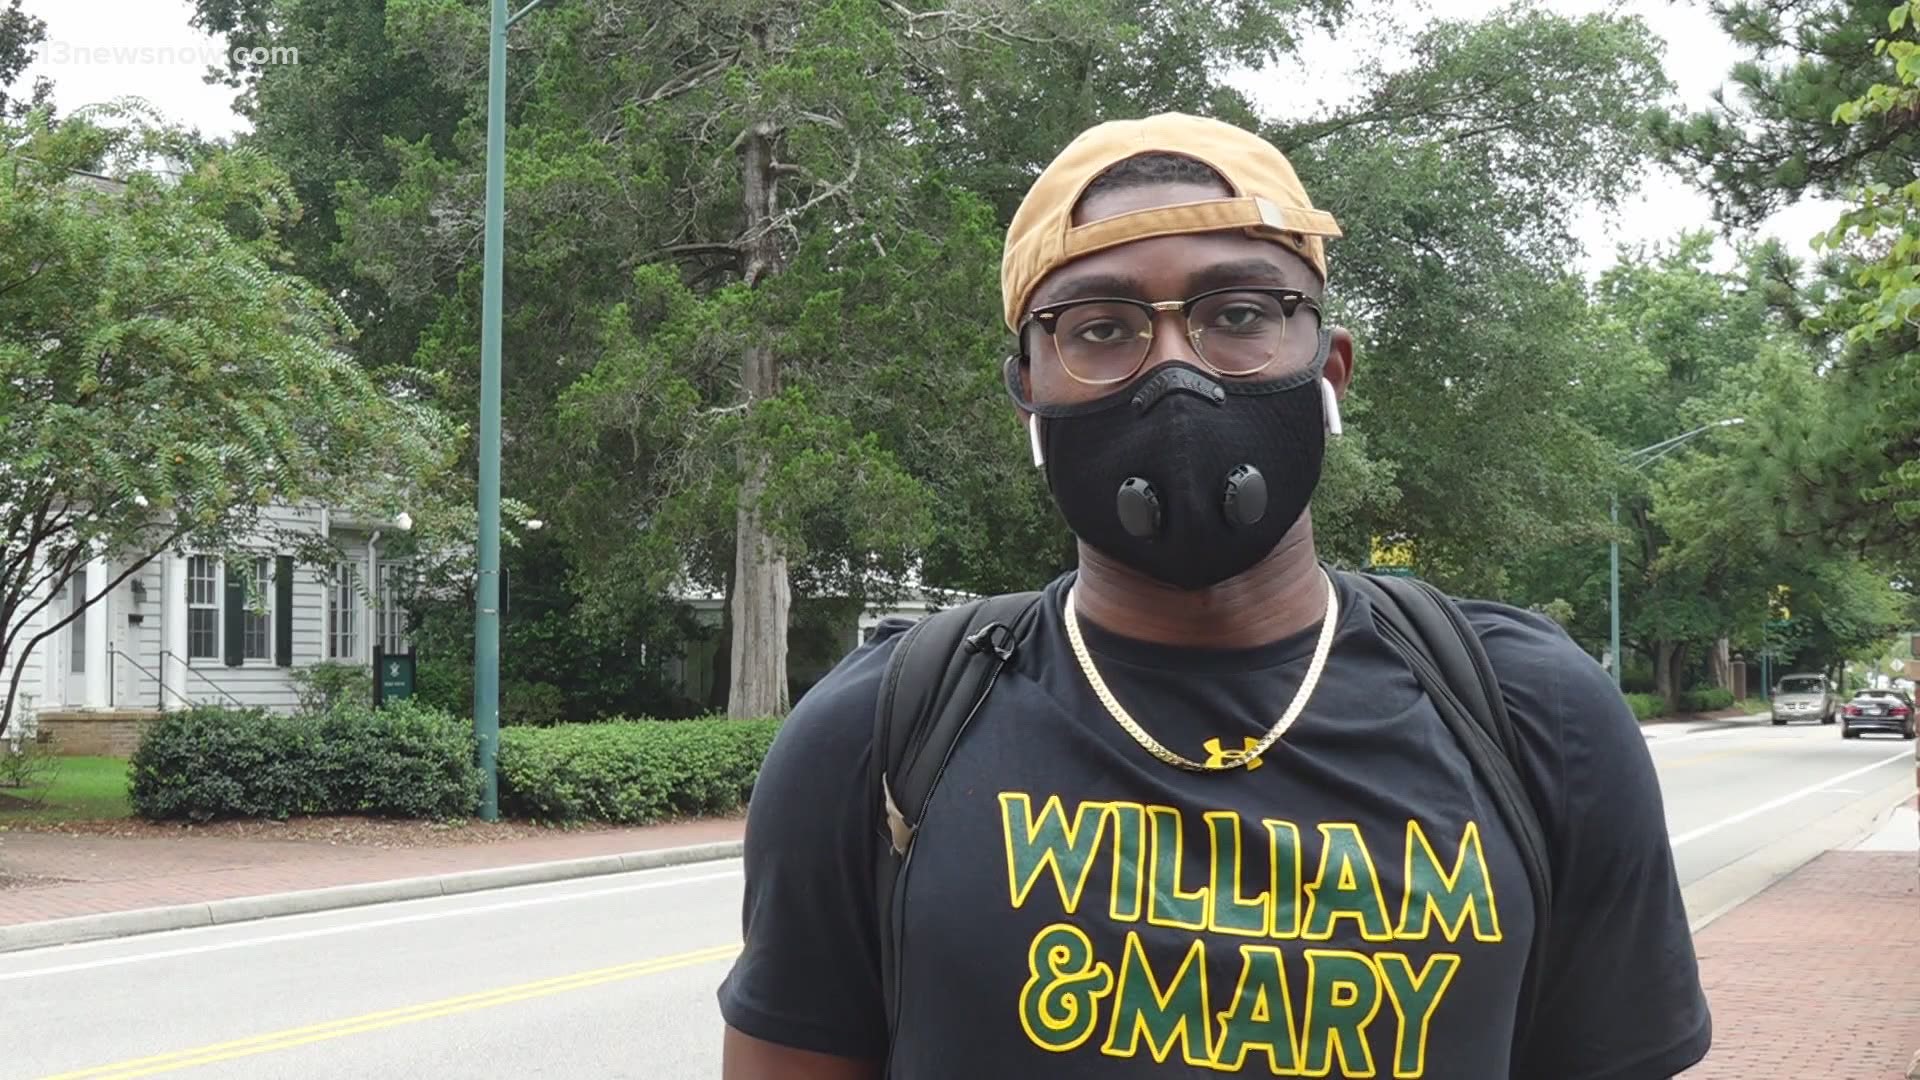 William & Mary shared some of the first examples of students not following the rules about social distancing, limiting gatherings and wearing face masks.